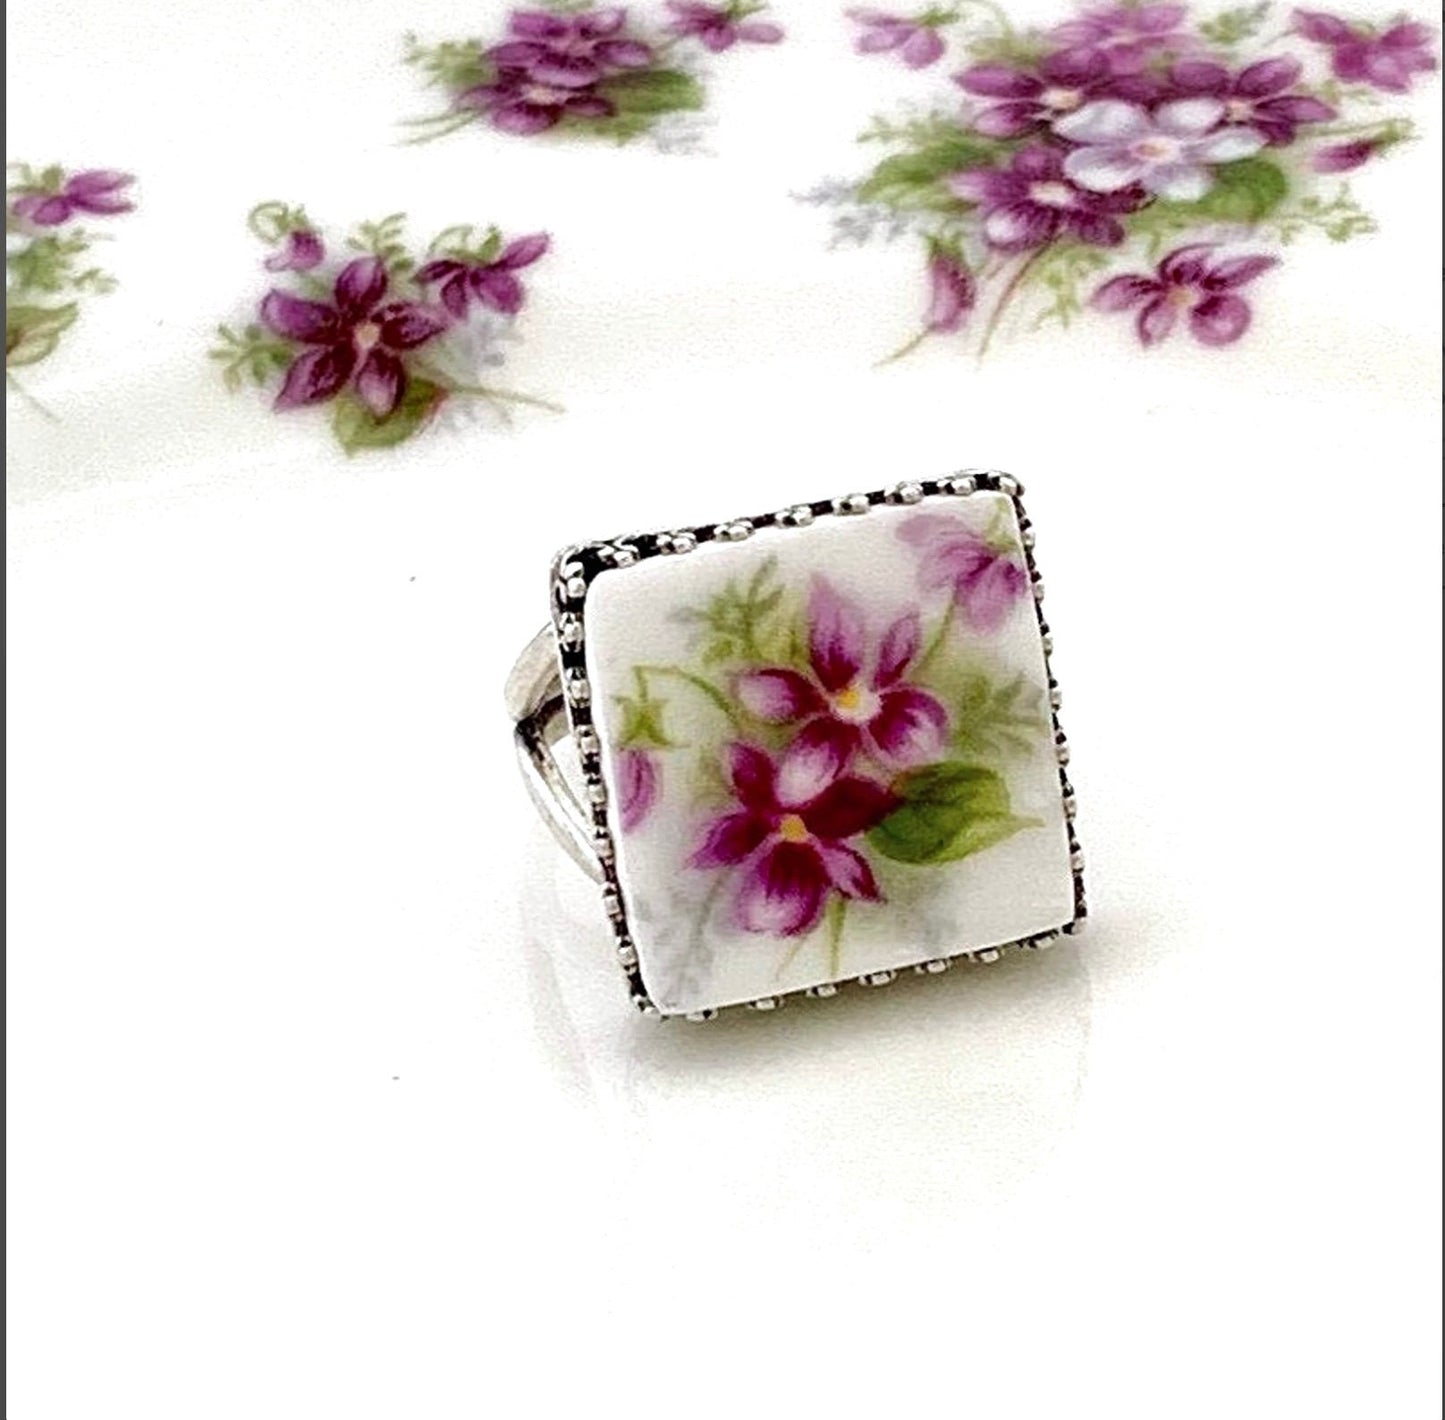 Royal Albert China, Purple Violet Flower Broken China Jewelry Ring, Sterling Silver Adjustable Ring, Square Statement Ring